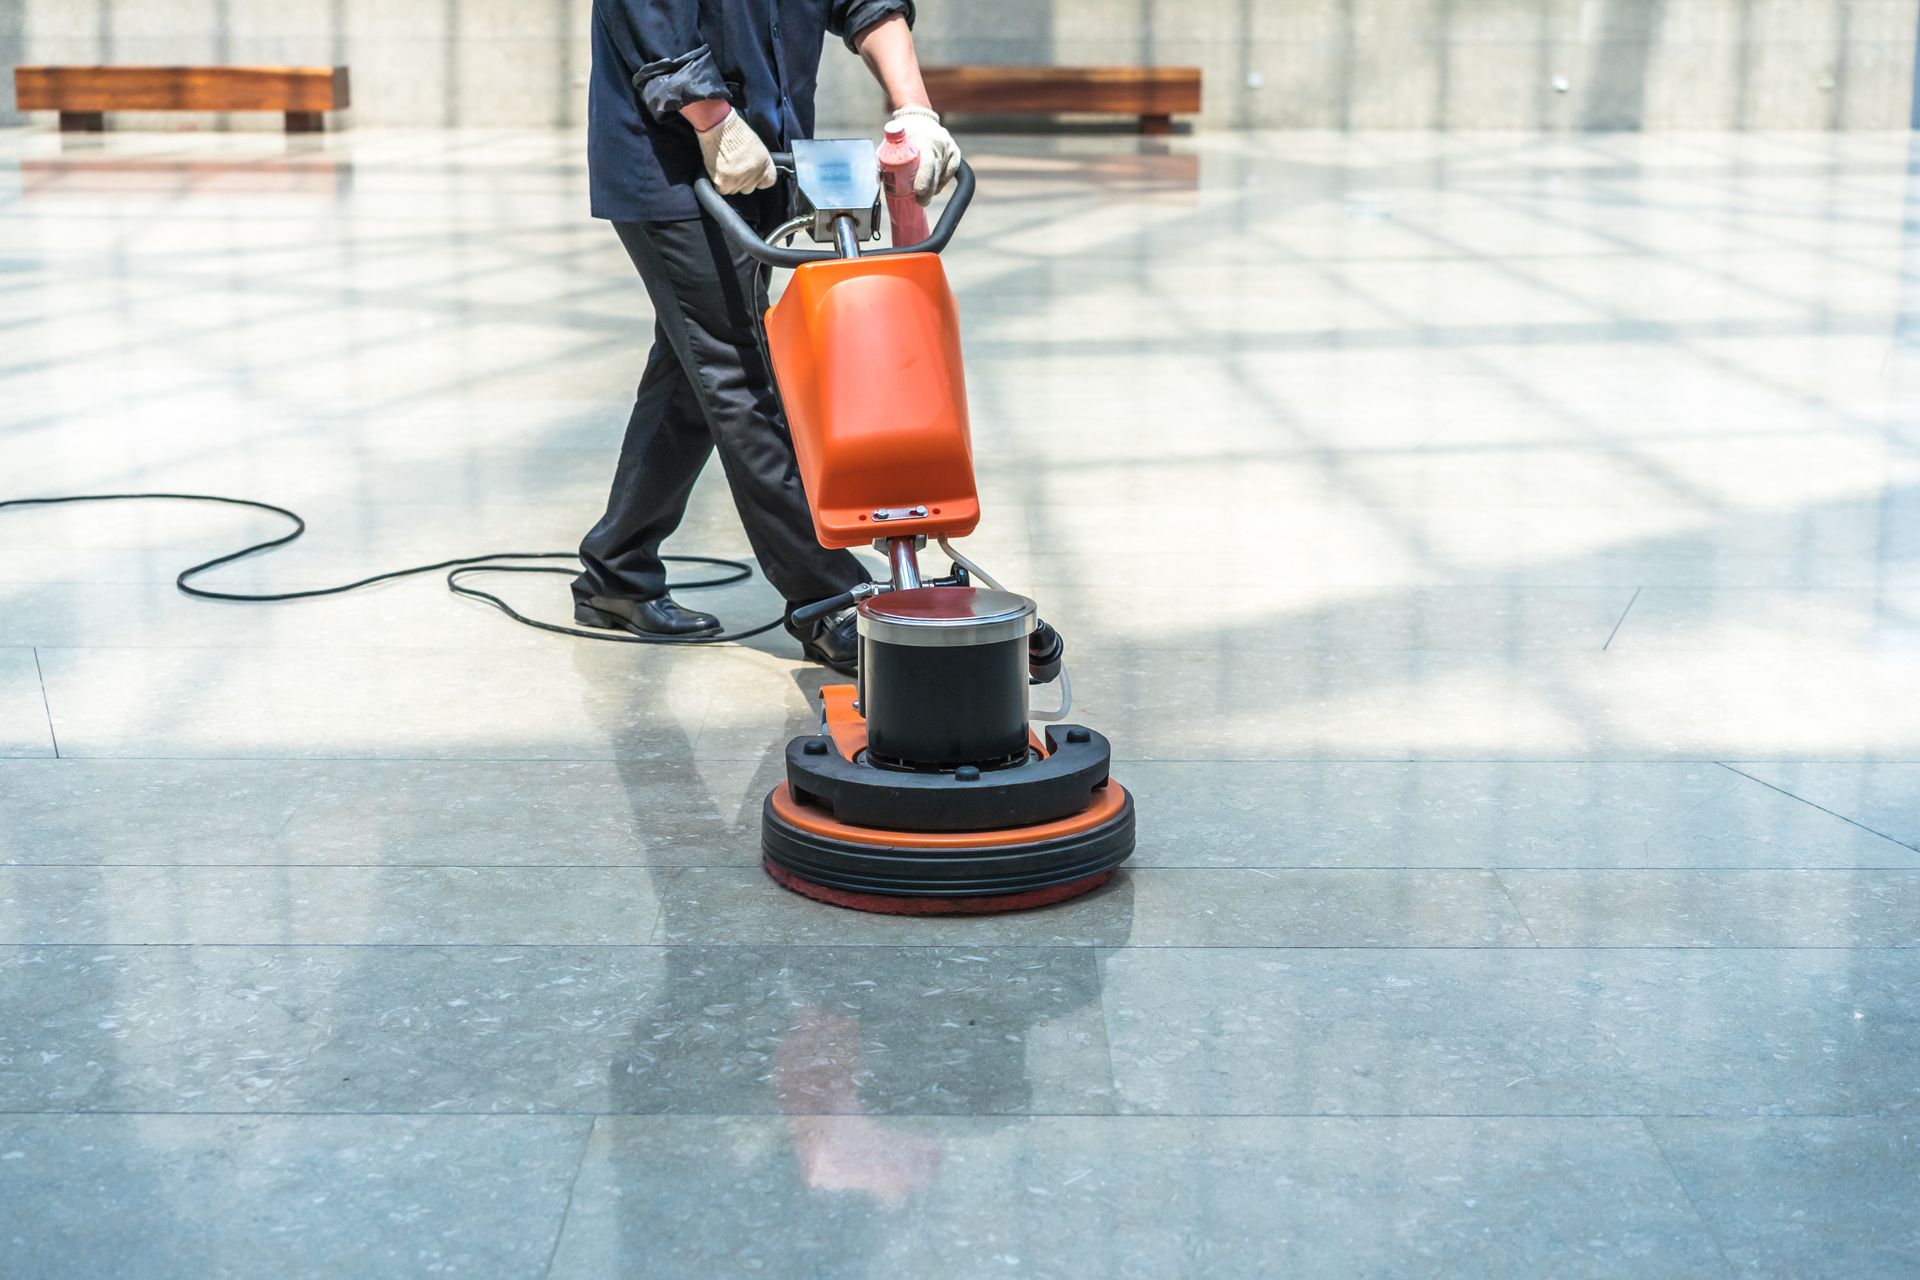 Person using a floor cleaning machine to efficiently scrub and polish the surface, leaving it sparkling clean and glossy.